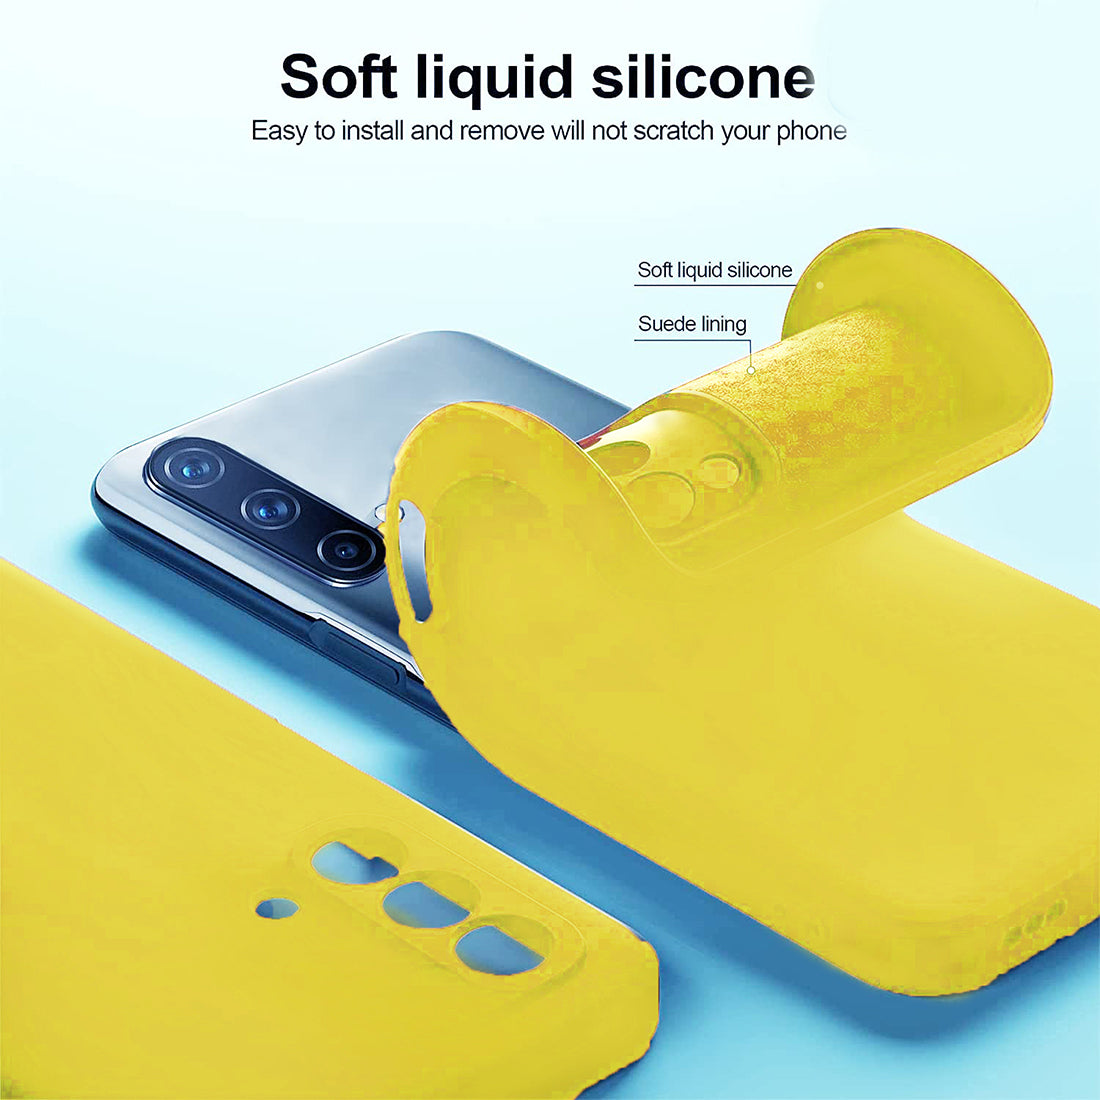 Liquid Silicone Case for OnePlus Nord CE 5G